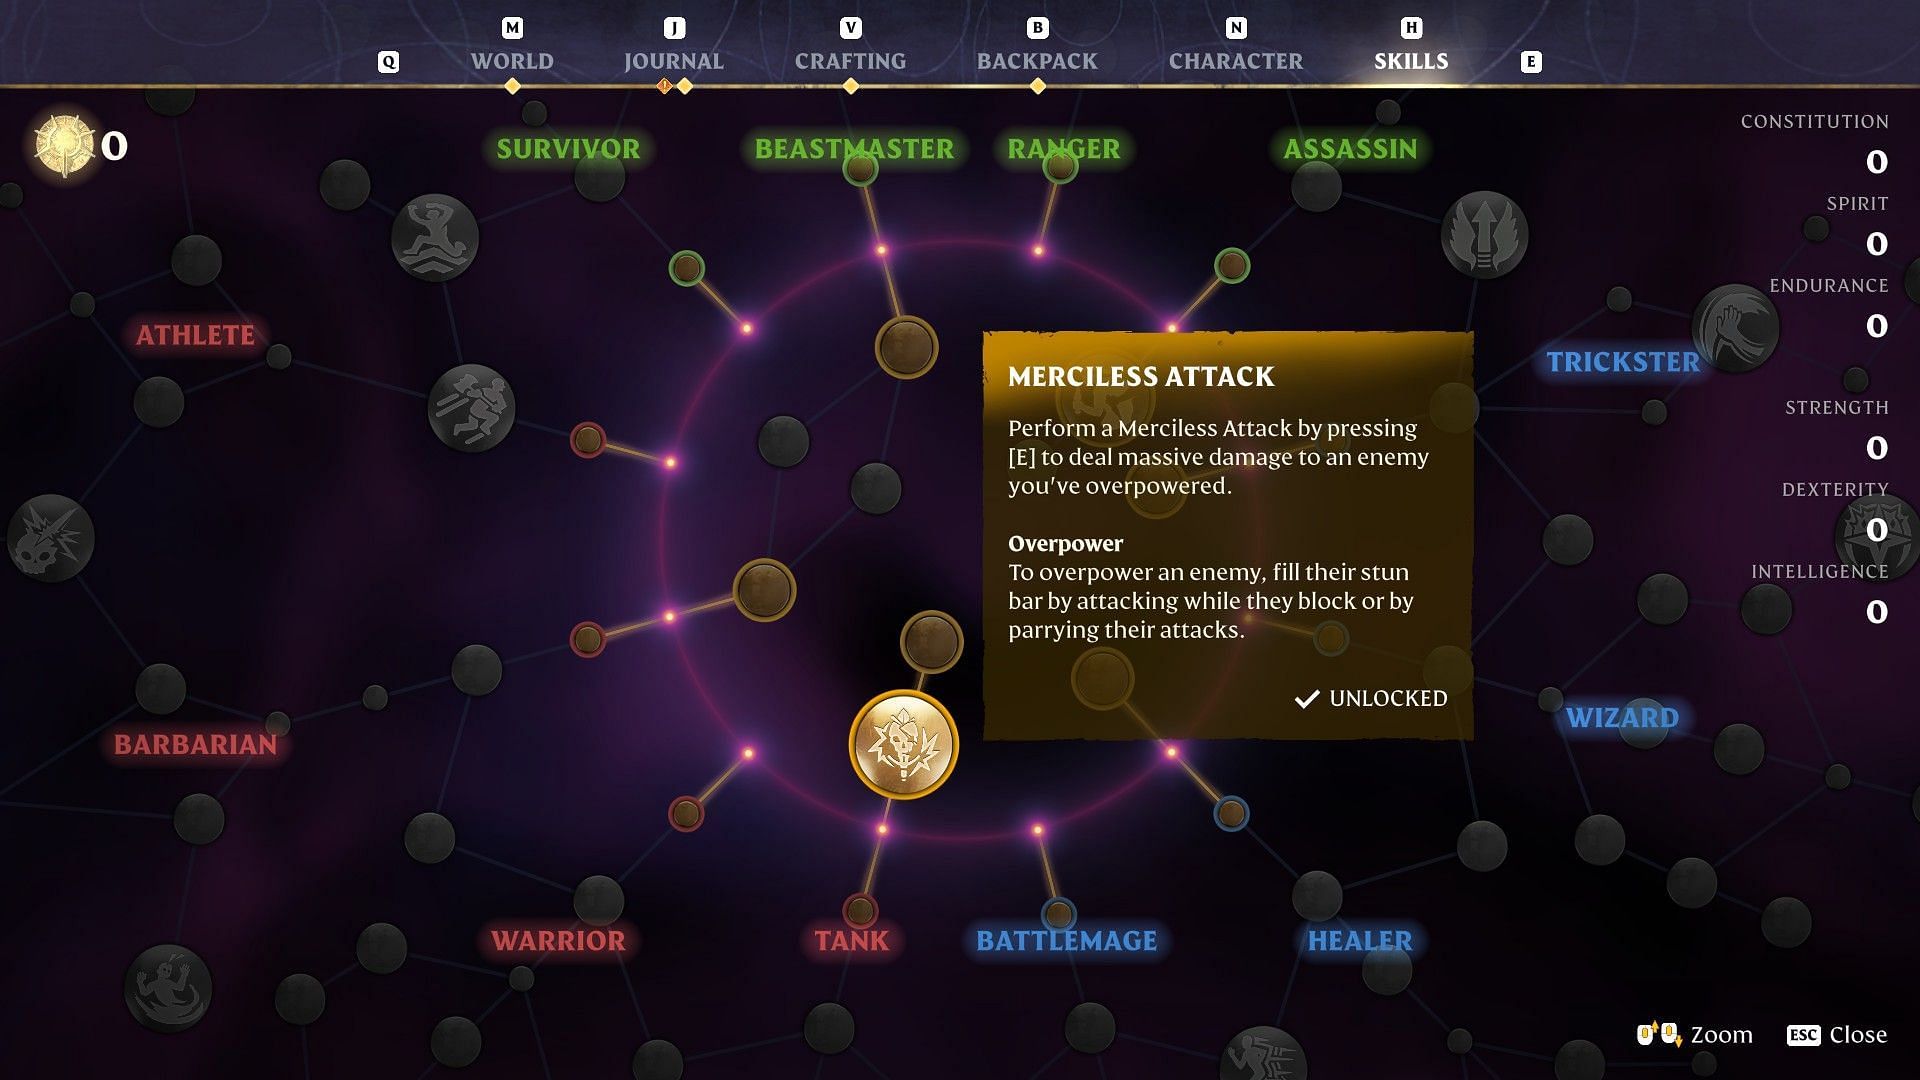 The game has a detailed skill wheel (Image via Keen Games)